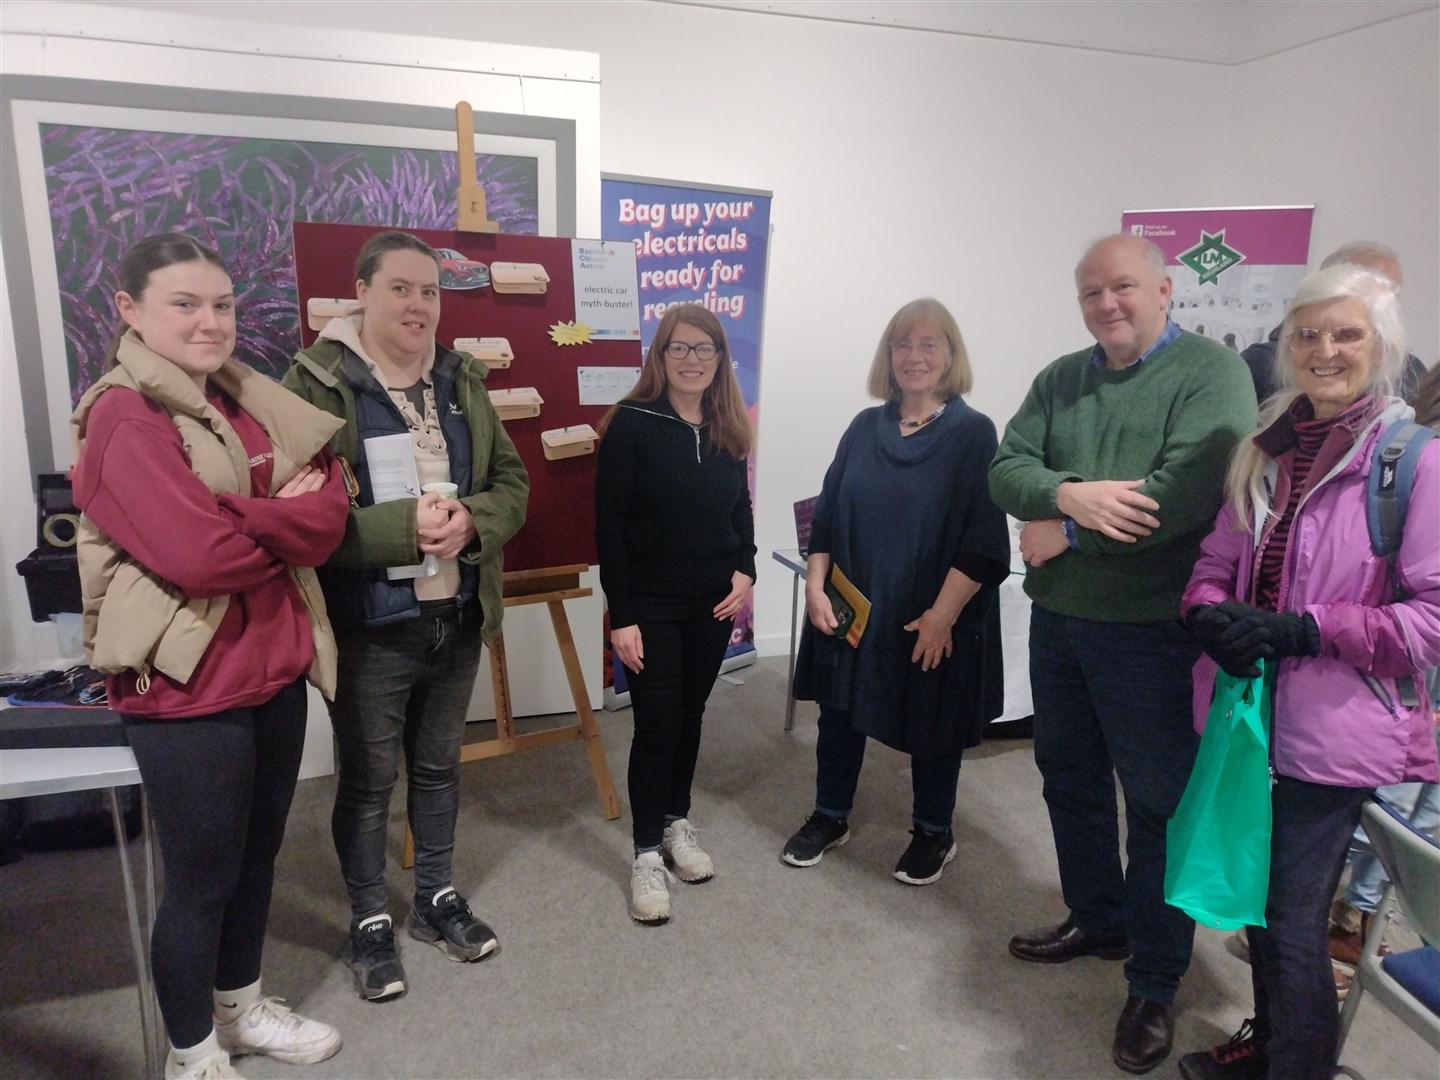 WELCOME TO OUR LAUNCH: Just some of those who turned out at Kingussie's Iona Gallery last weekend to get the new climate action group under way in Badenoch and Strathspey. Photographs Frances Porter and Tom Ramage